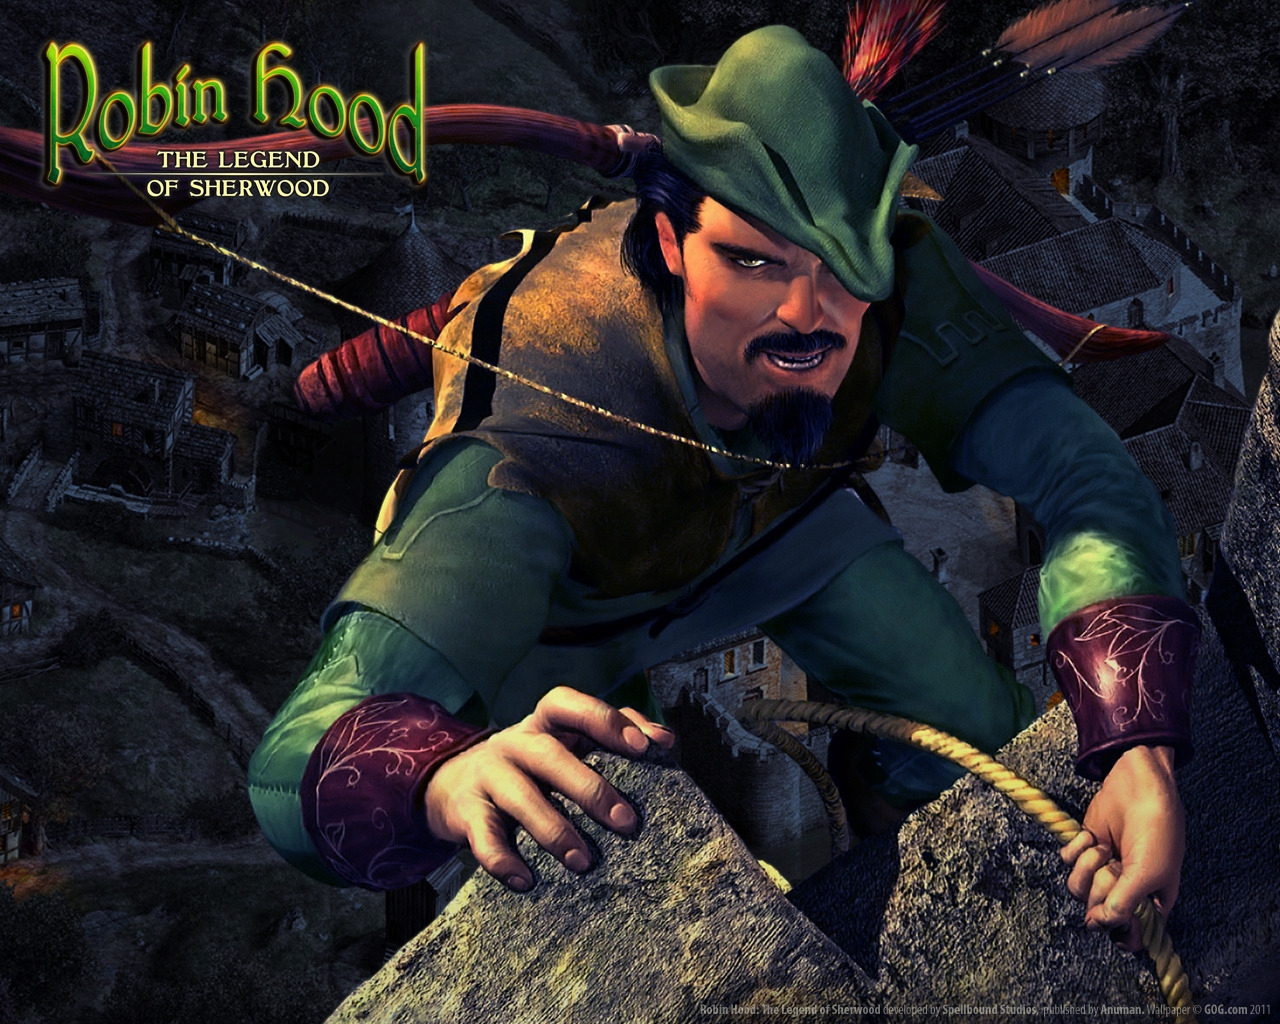 Robin Hood The Legend of Sherwood for 1280 x 1024 resolution